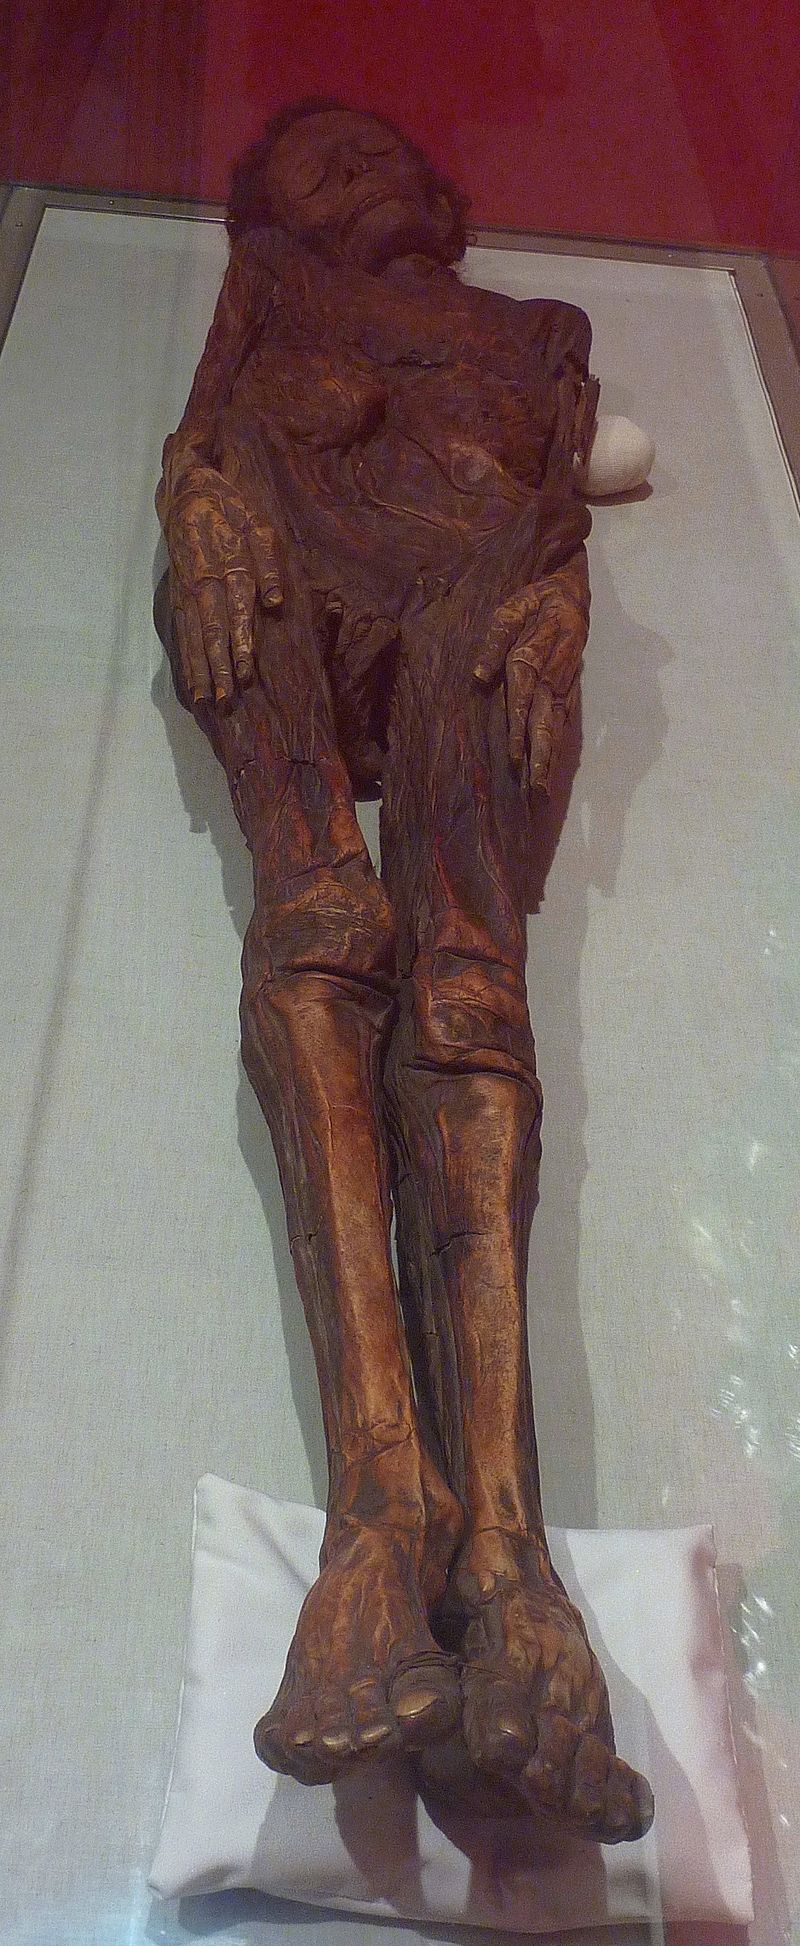 Mummy of an ancient inhabitant of the Canary Islands